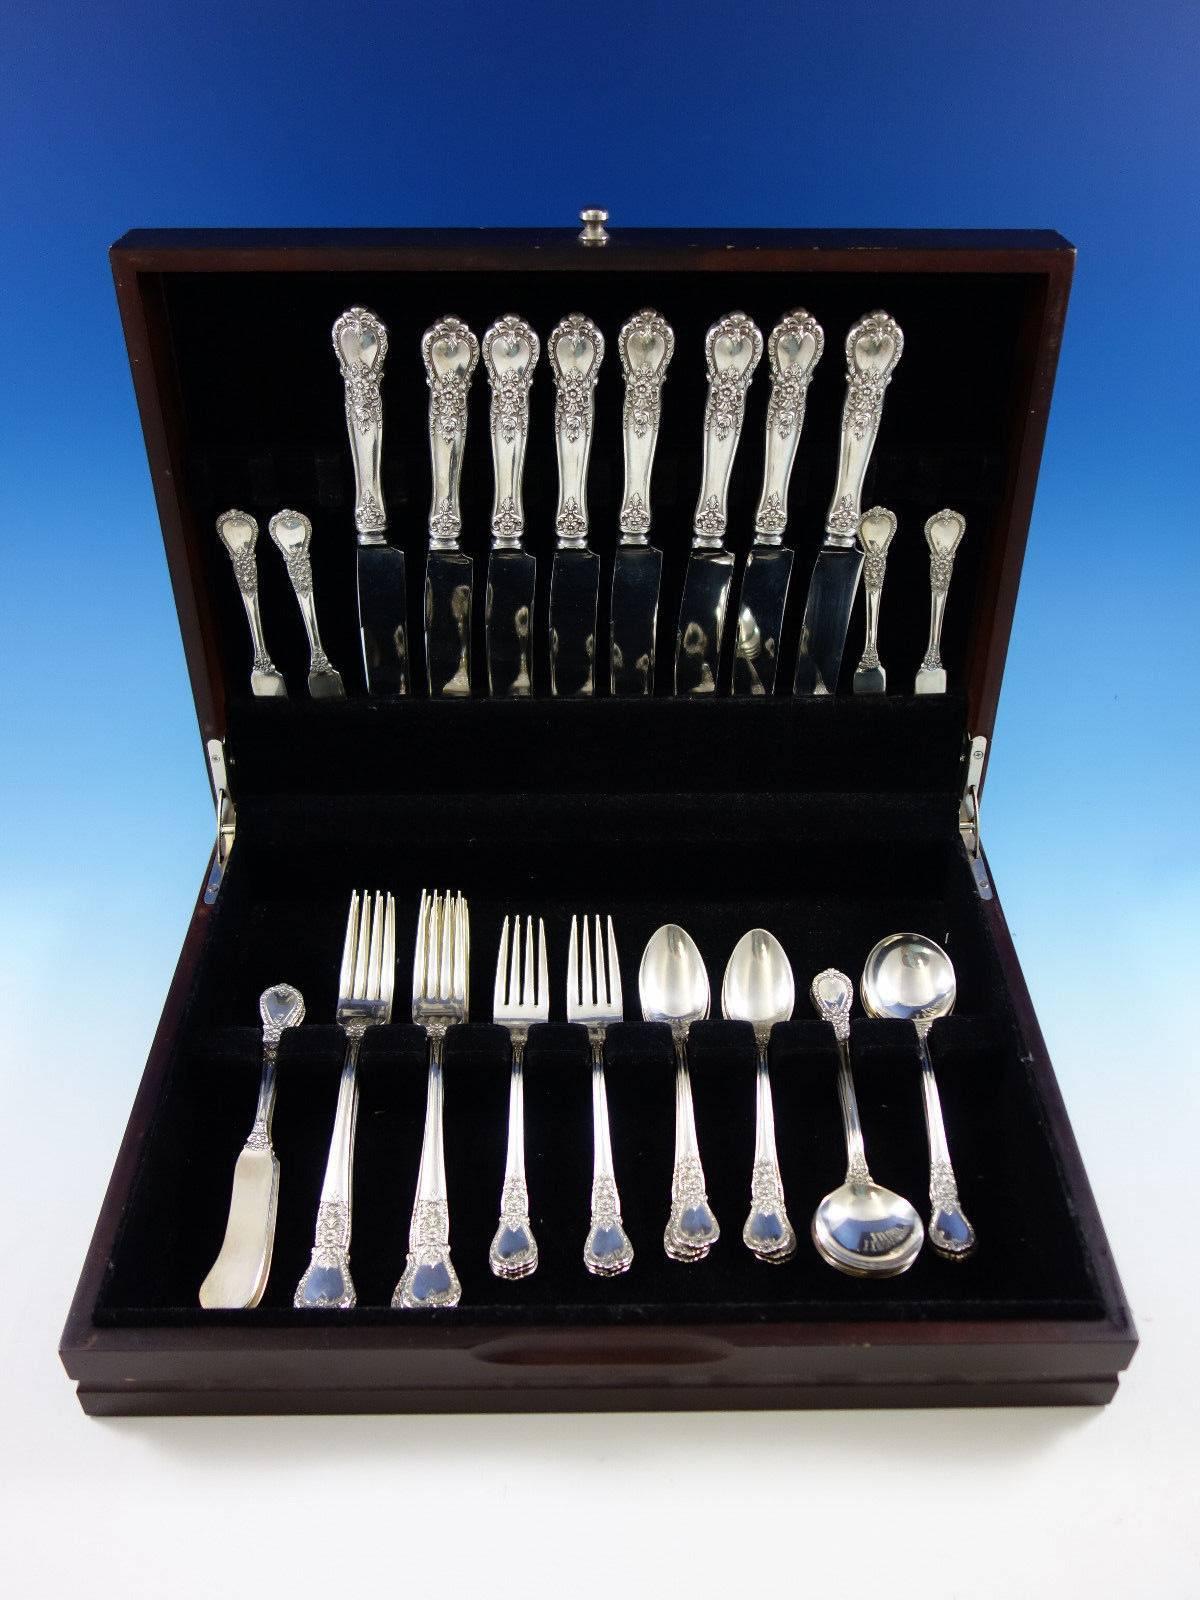 Ballet by Weidlich Sterling Silver Flatware set - 48 pieces. This set includes: 

8 Dinner Size Knives, 9 1/2